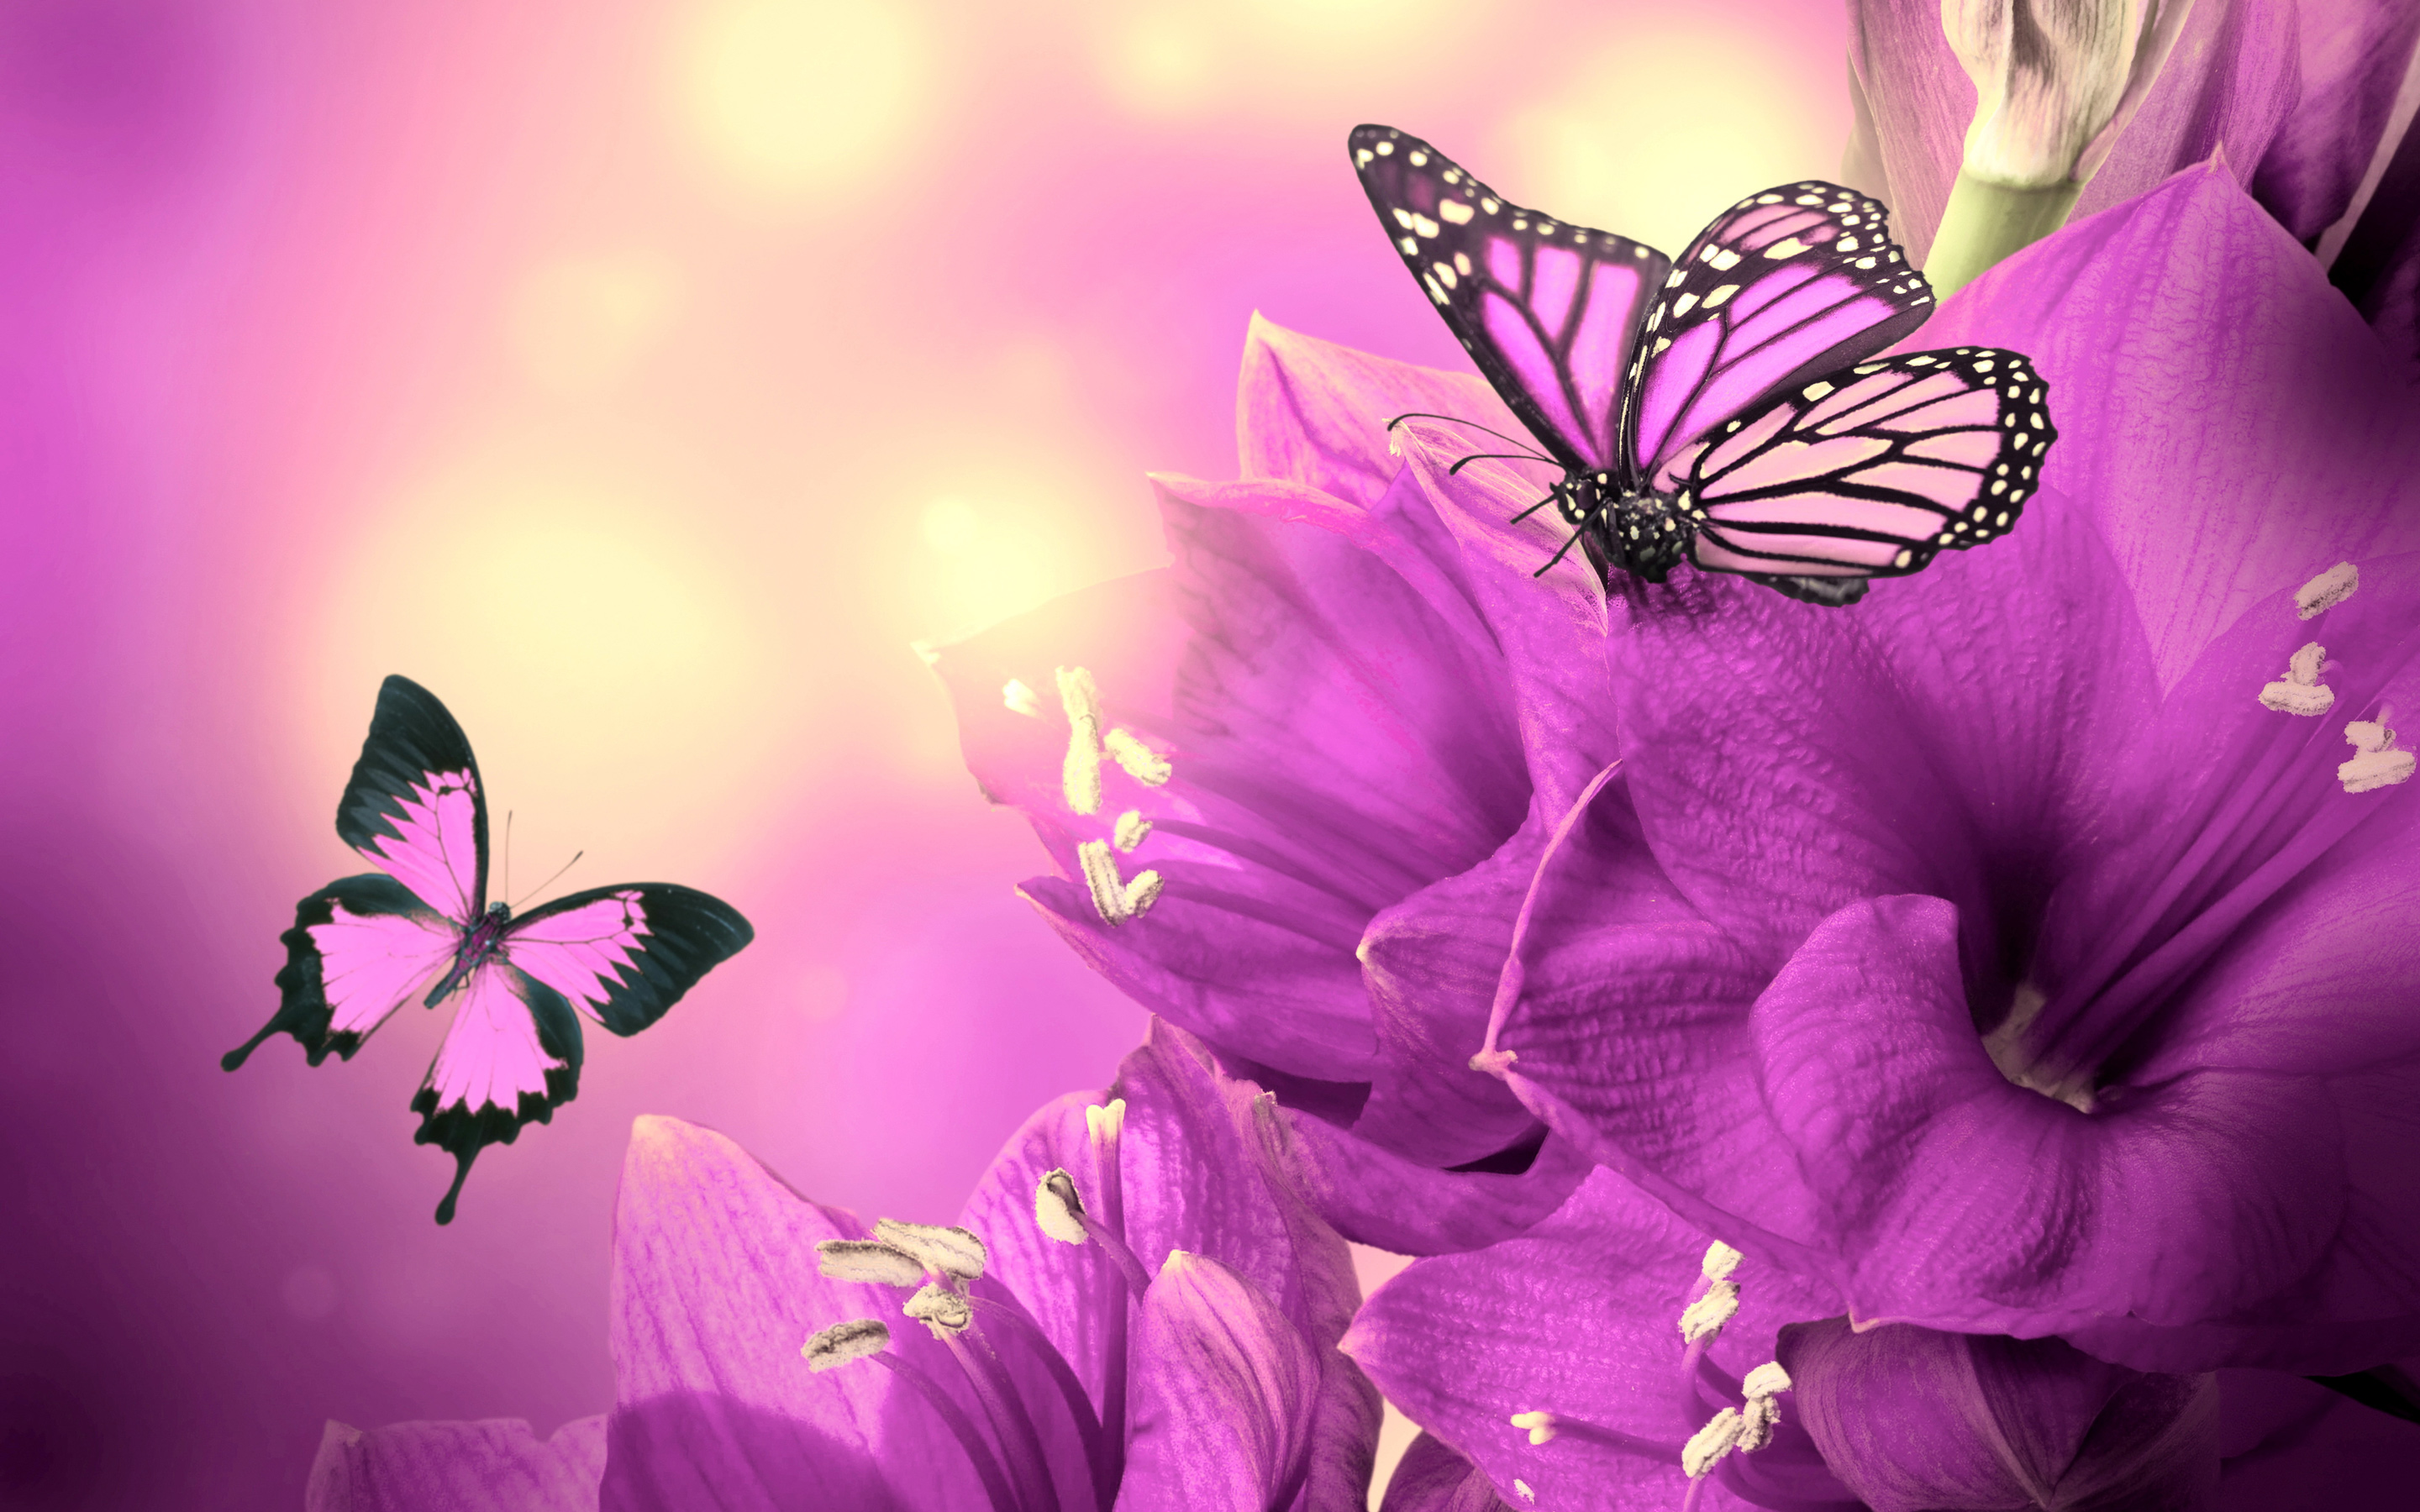  HD Wallpapers   High Definition Wallpapers Spring Butterfly Wallpapers